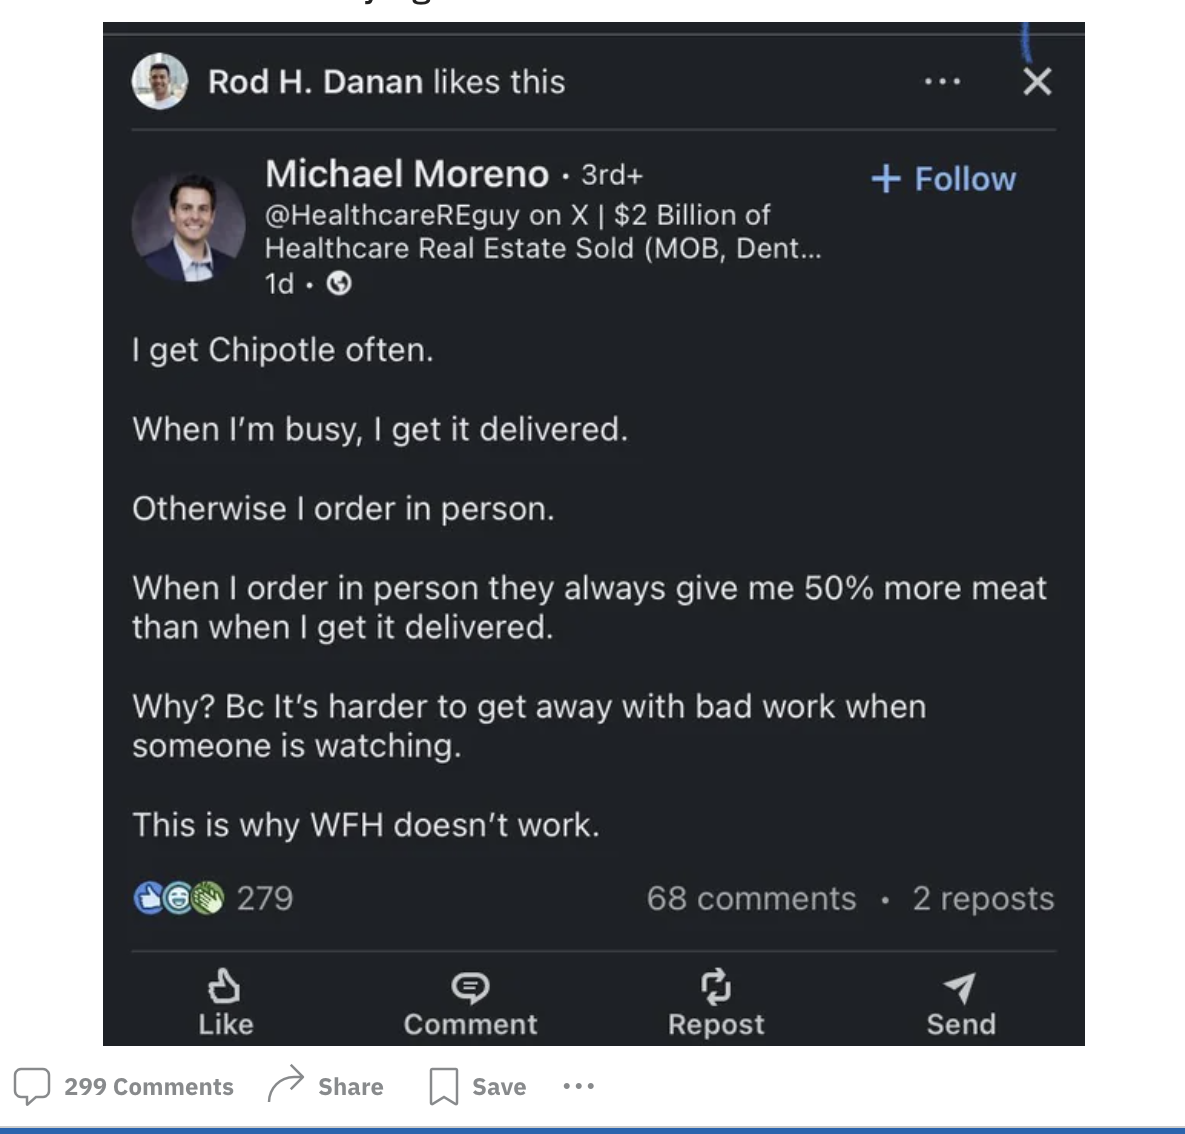 screenshot - Rod H. Danan this Michael Moreno. 3rd on X | $2 Billion of Healthcare Real Estate Sold Mob, Dent... 1d. I get Chipotle often. When I'm busy, I get it delivered. Otherwise I order in person. When I order in person they always give me 50% more 